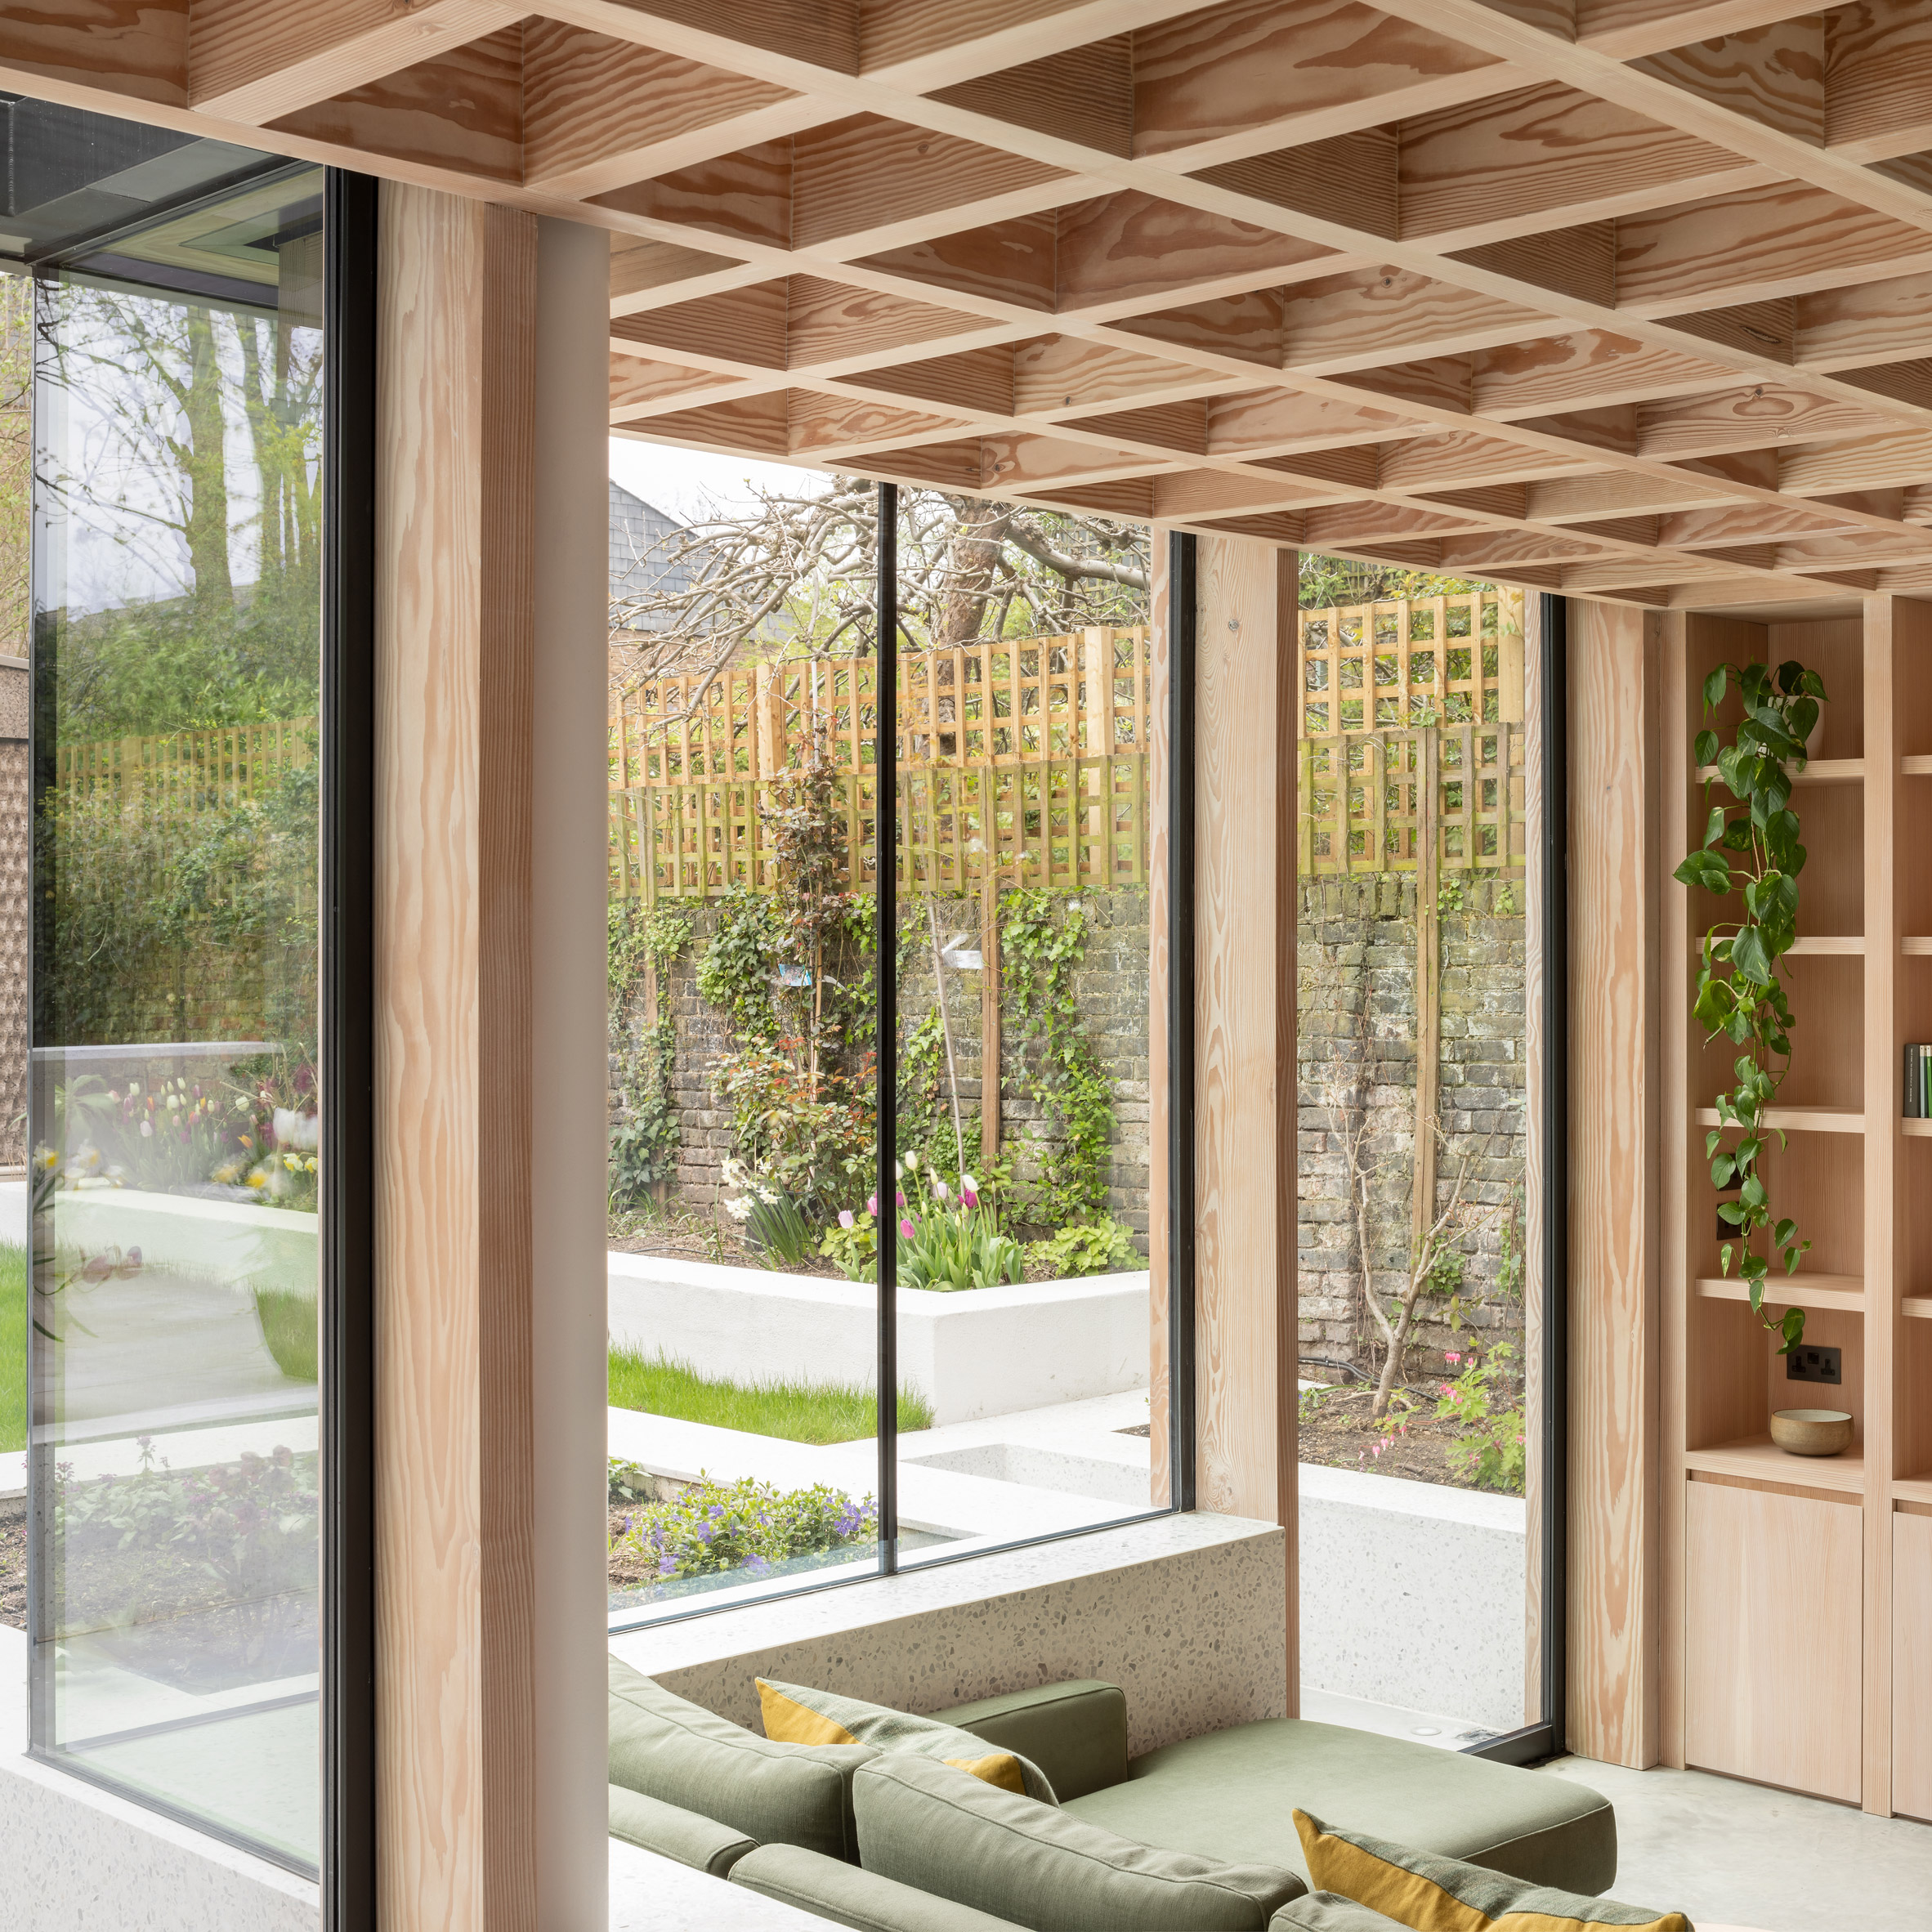 Home extension with a wood lattice ceiling